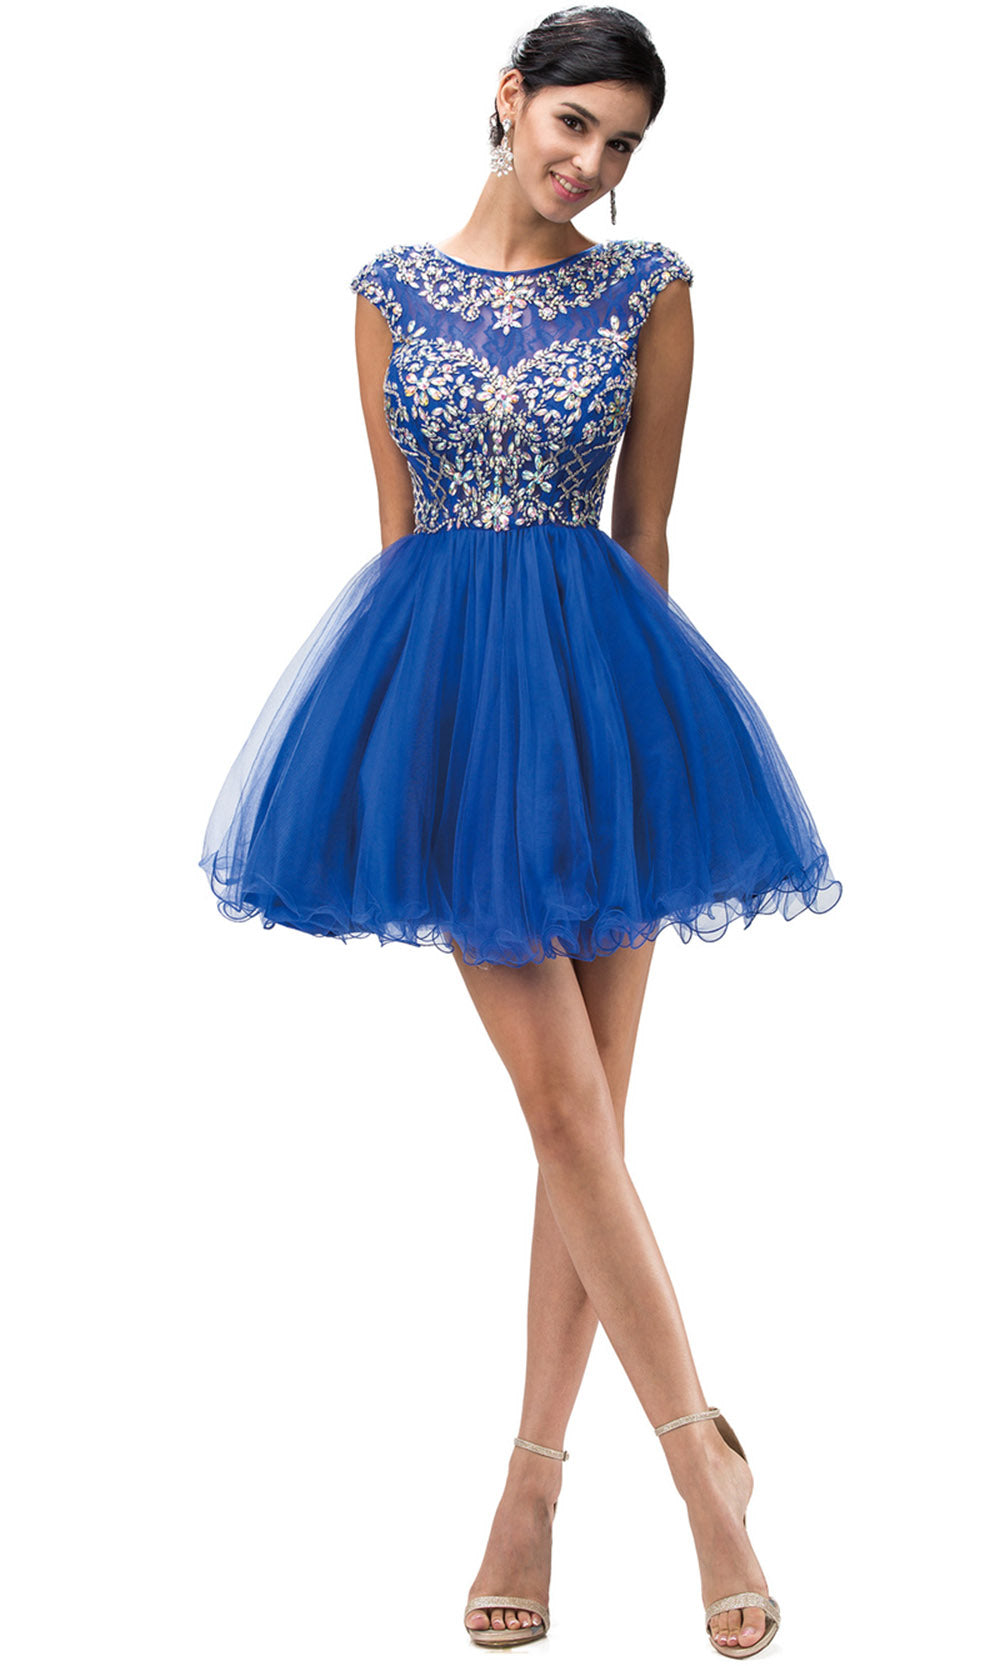 Dancing Queen - 9149 Multi-Beaded Bodice Fit And Flare Cocktail Dress In Bluegrade 8 grad dresses, graduation dresses